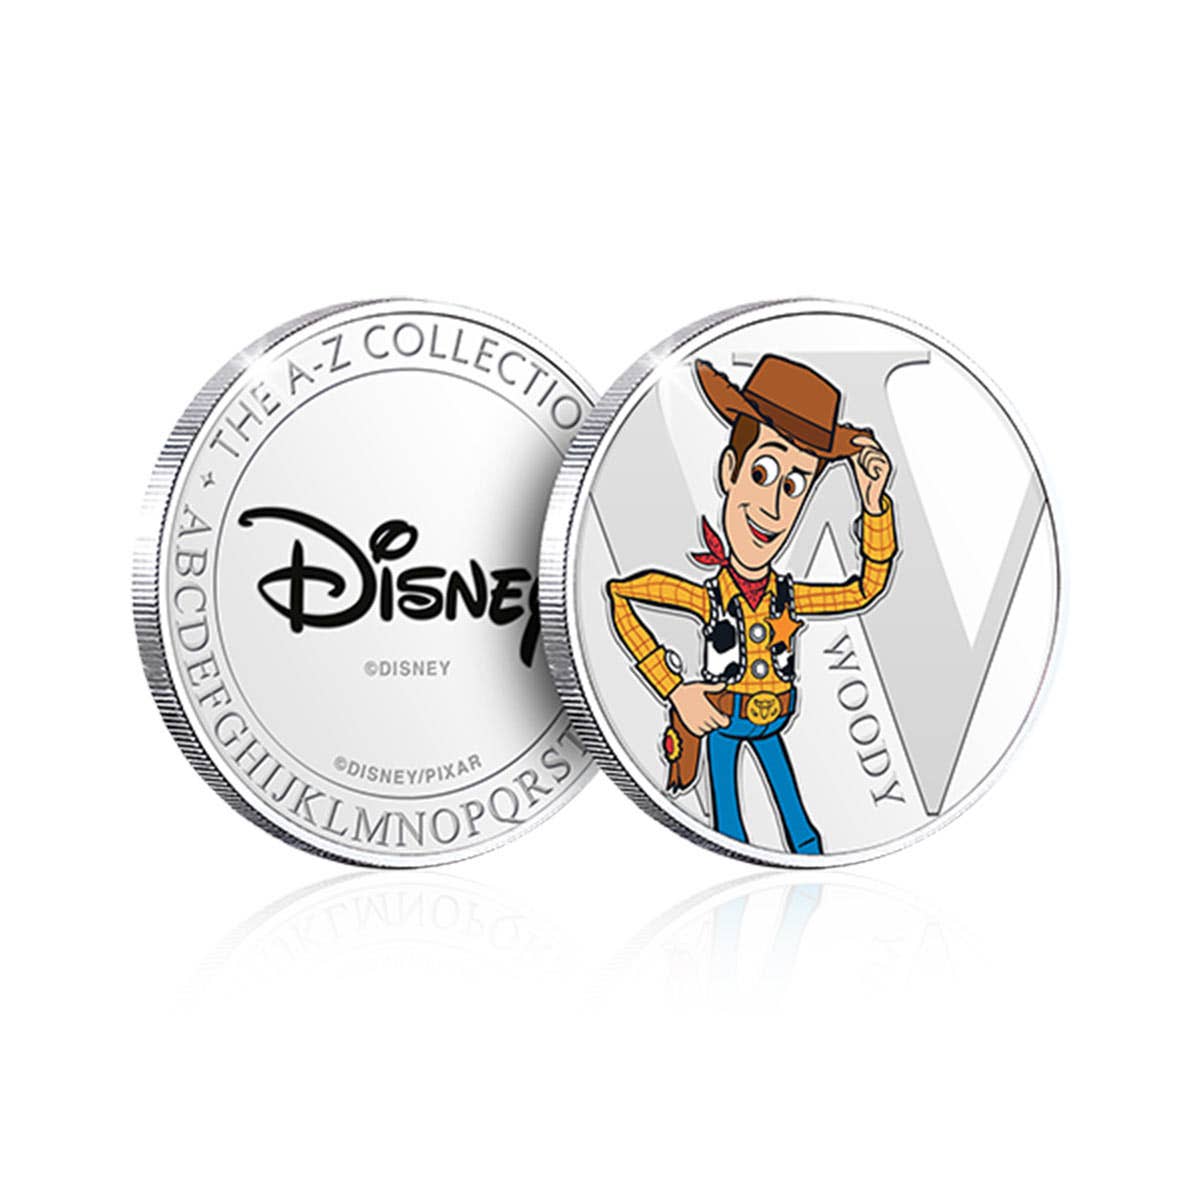 Disney W is for Woody Silver-Plated Commemorative